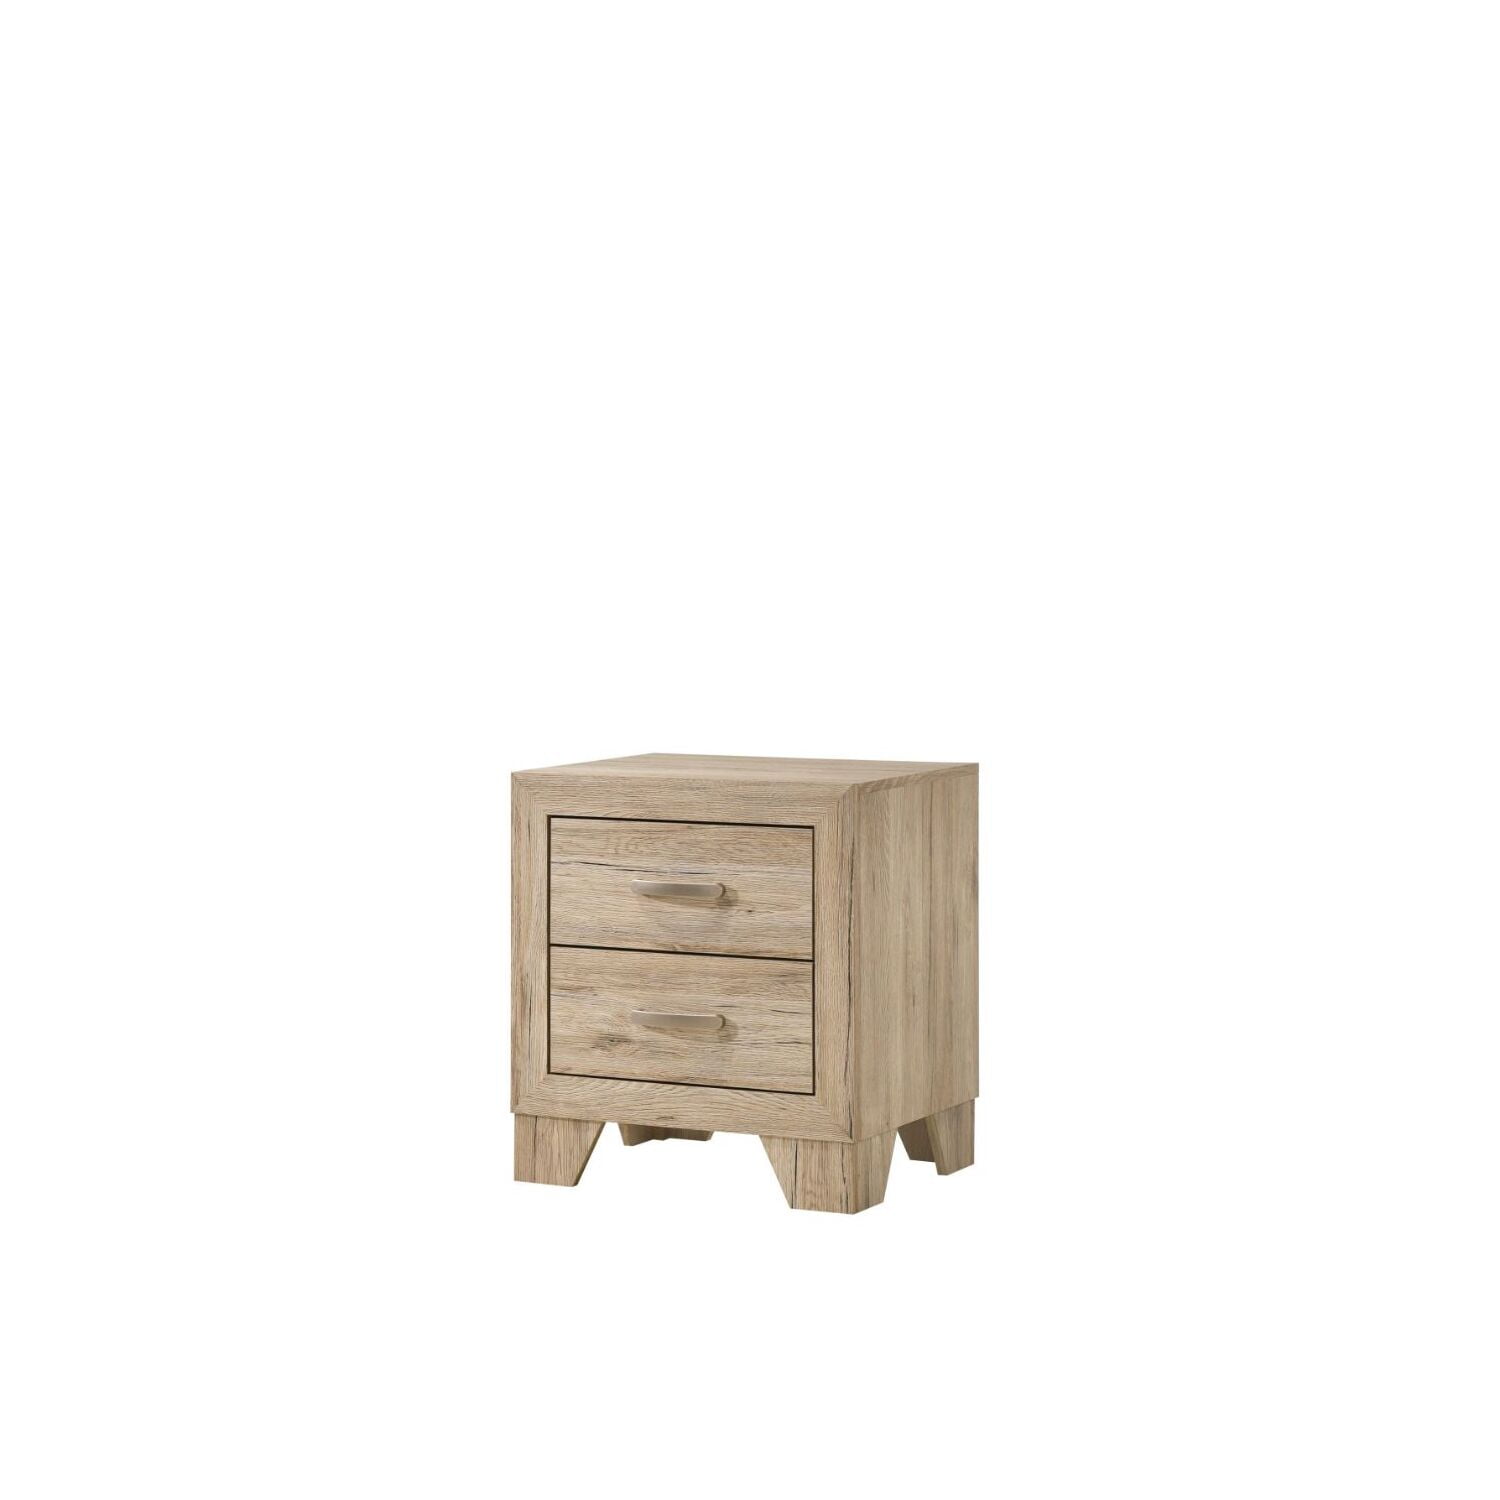 Picture of Acme Furniture 28043 24 x 16 x 22 in. Miquell 2 Drawer Nightstand, Natural